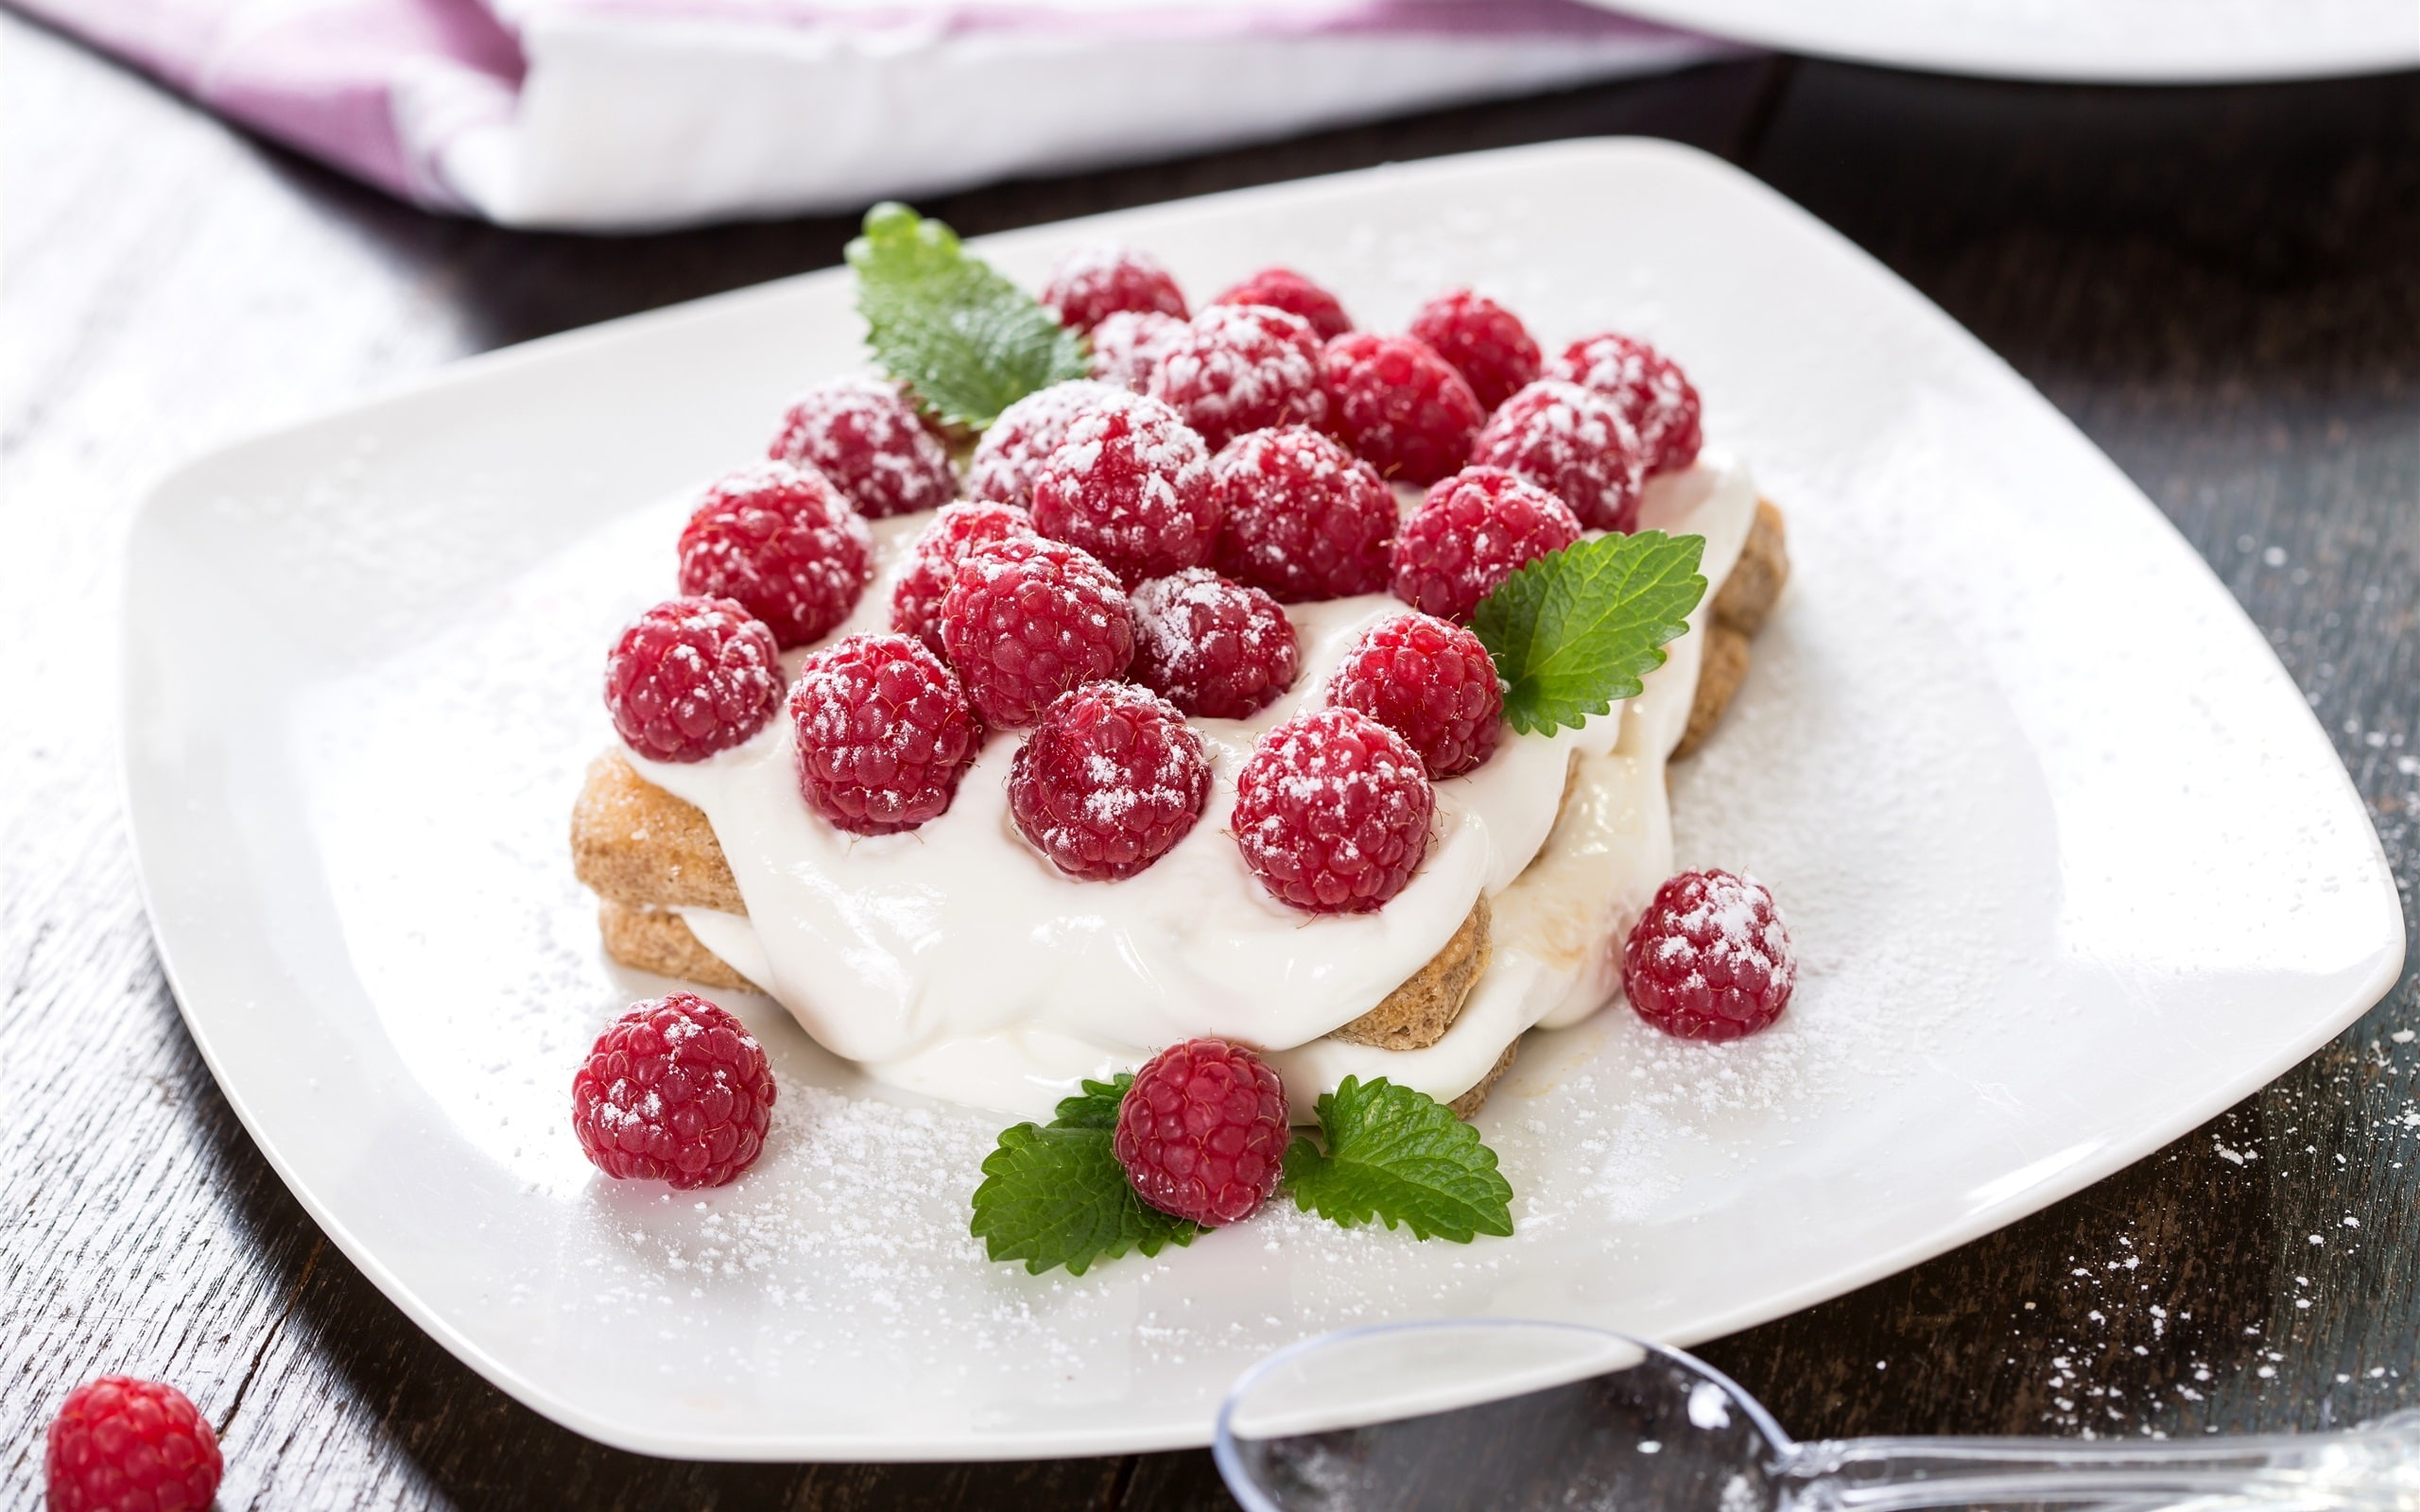 Sweet cake, cream, raspberries, red berries, bread with white cream and red fruit on top